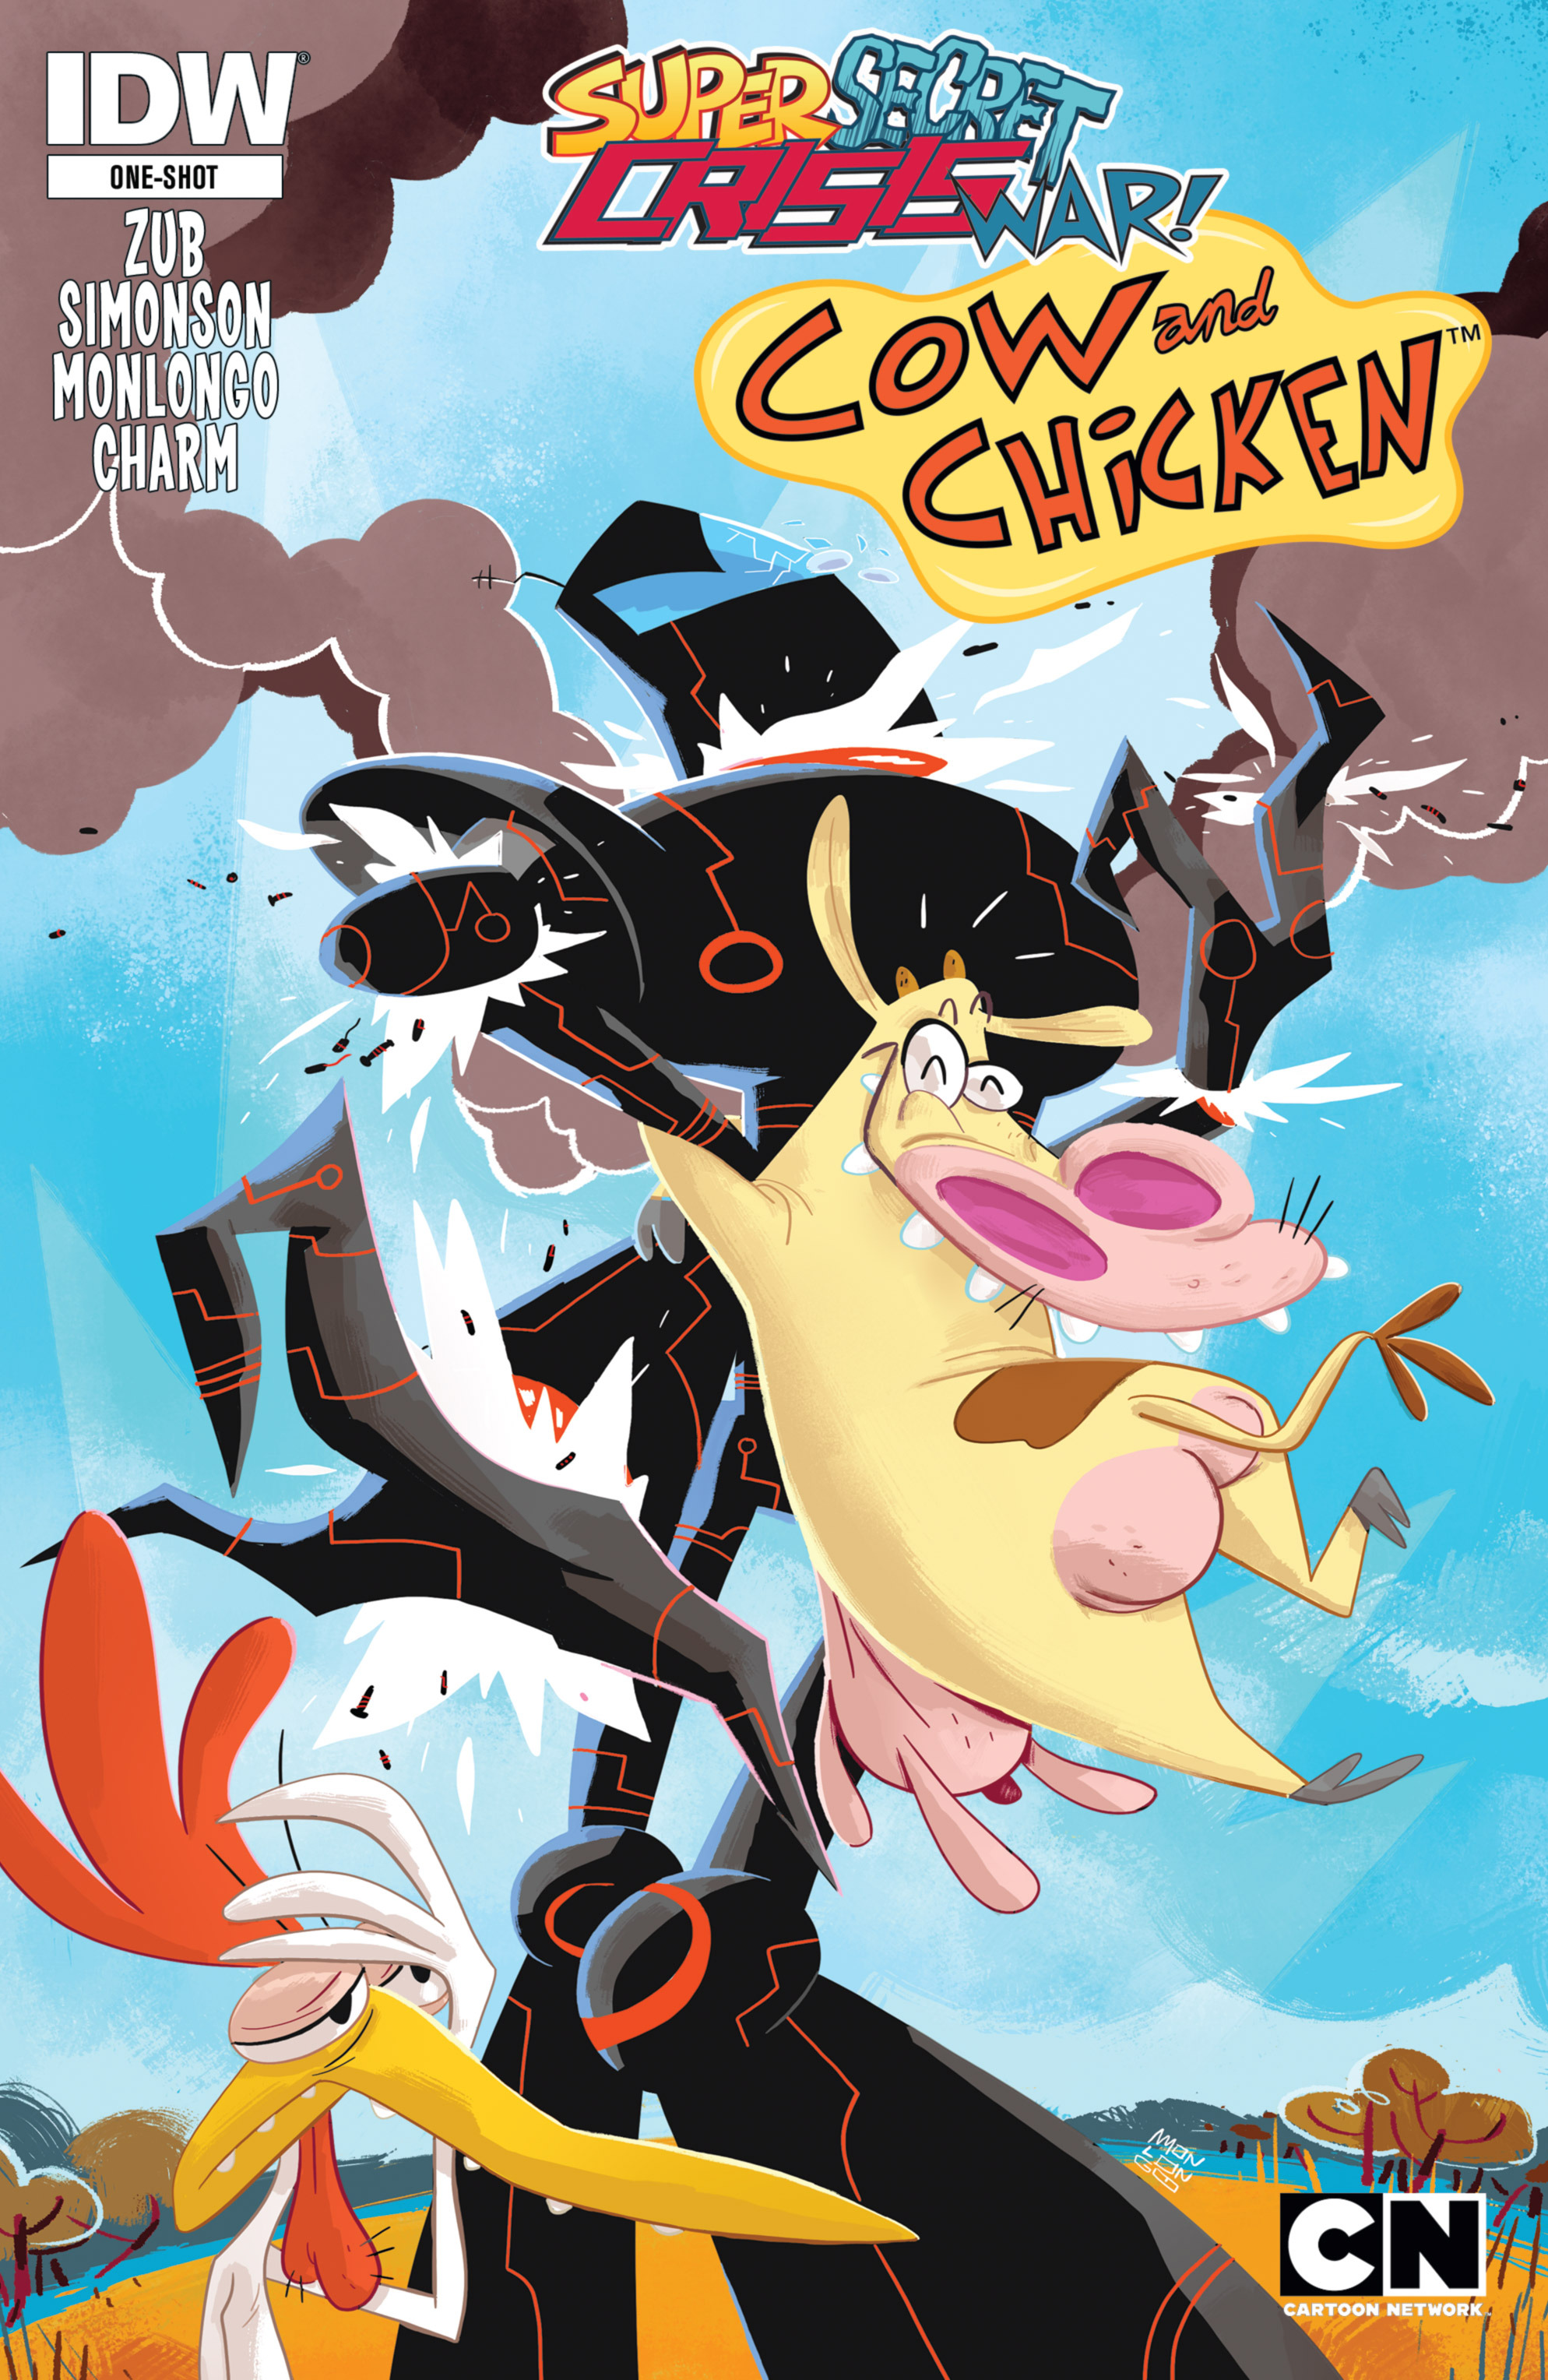 Mickey Mouse Imagefap Porn - Super Secret Crisis War Special Cow And Chicken | Read Super Secret Crisis  War Special Cow And Chicken comic online in high quality. Read Full Comic  online for free - Read comics